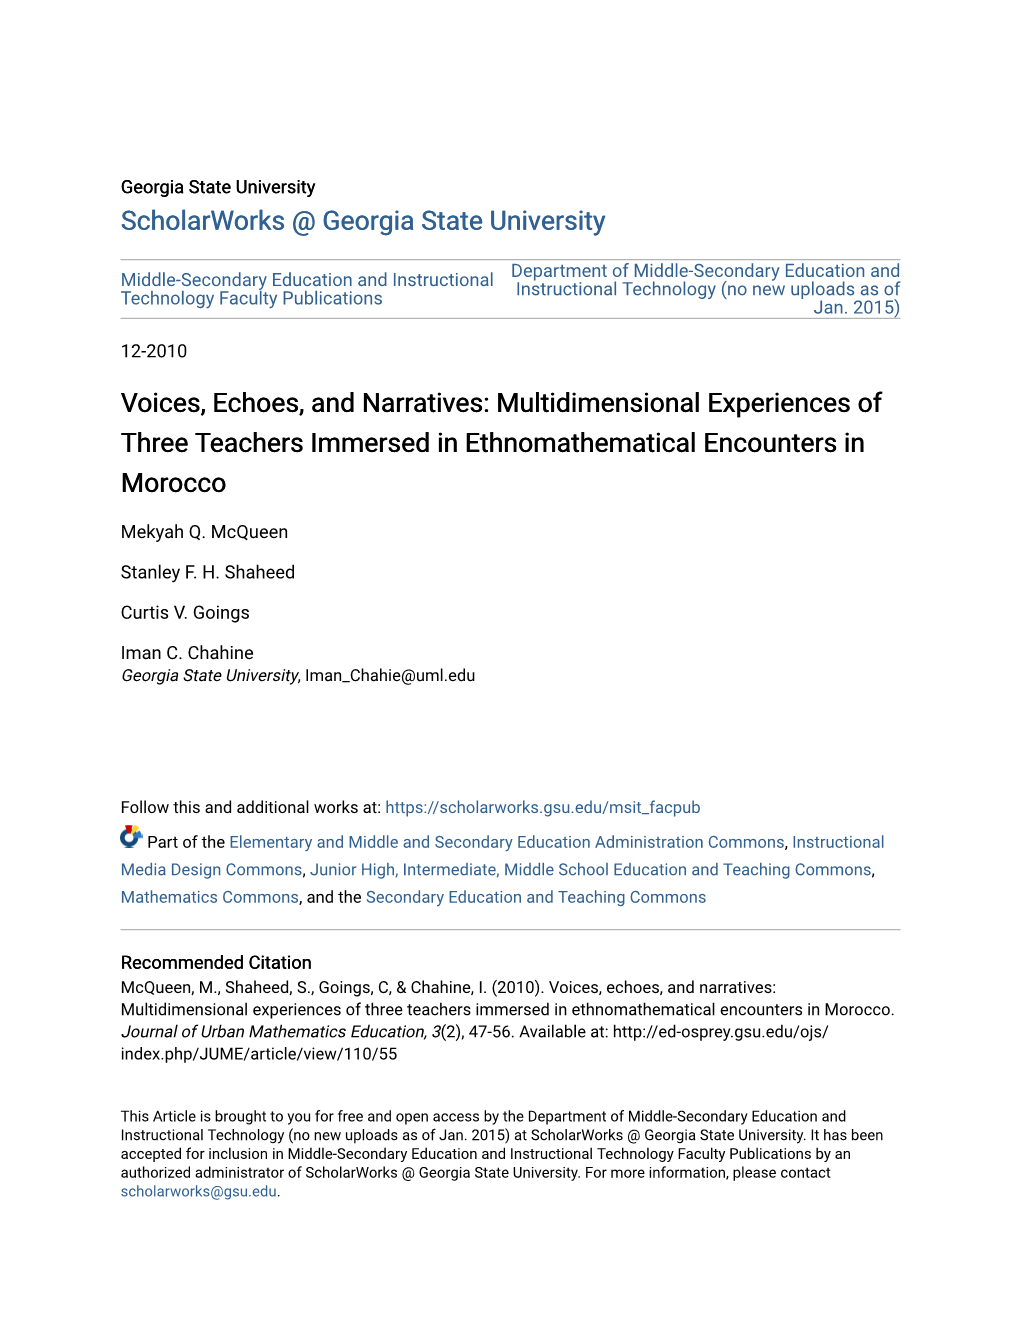 Voices, Echoes, and Narratives: Multidimensional Experiences of Three Teachers Immersed in Ethnomathematical Encounters in Morocco